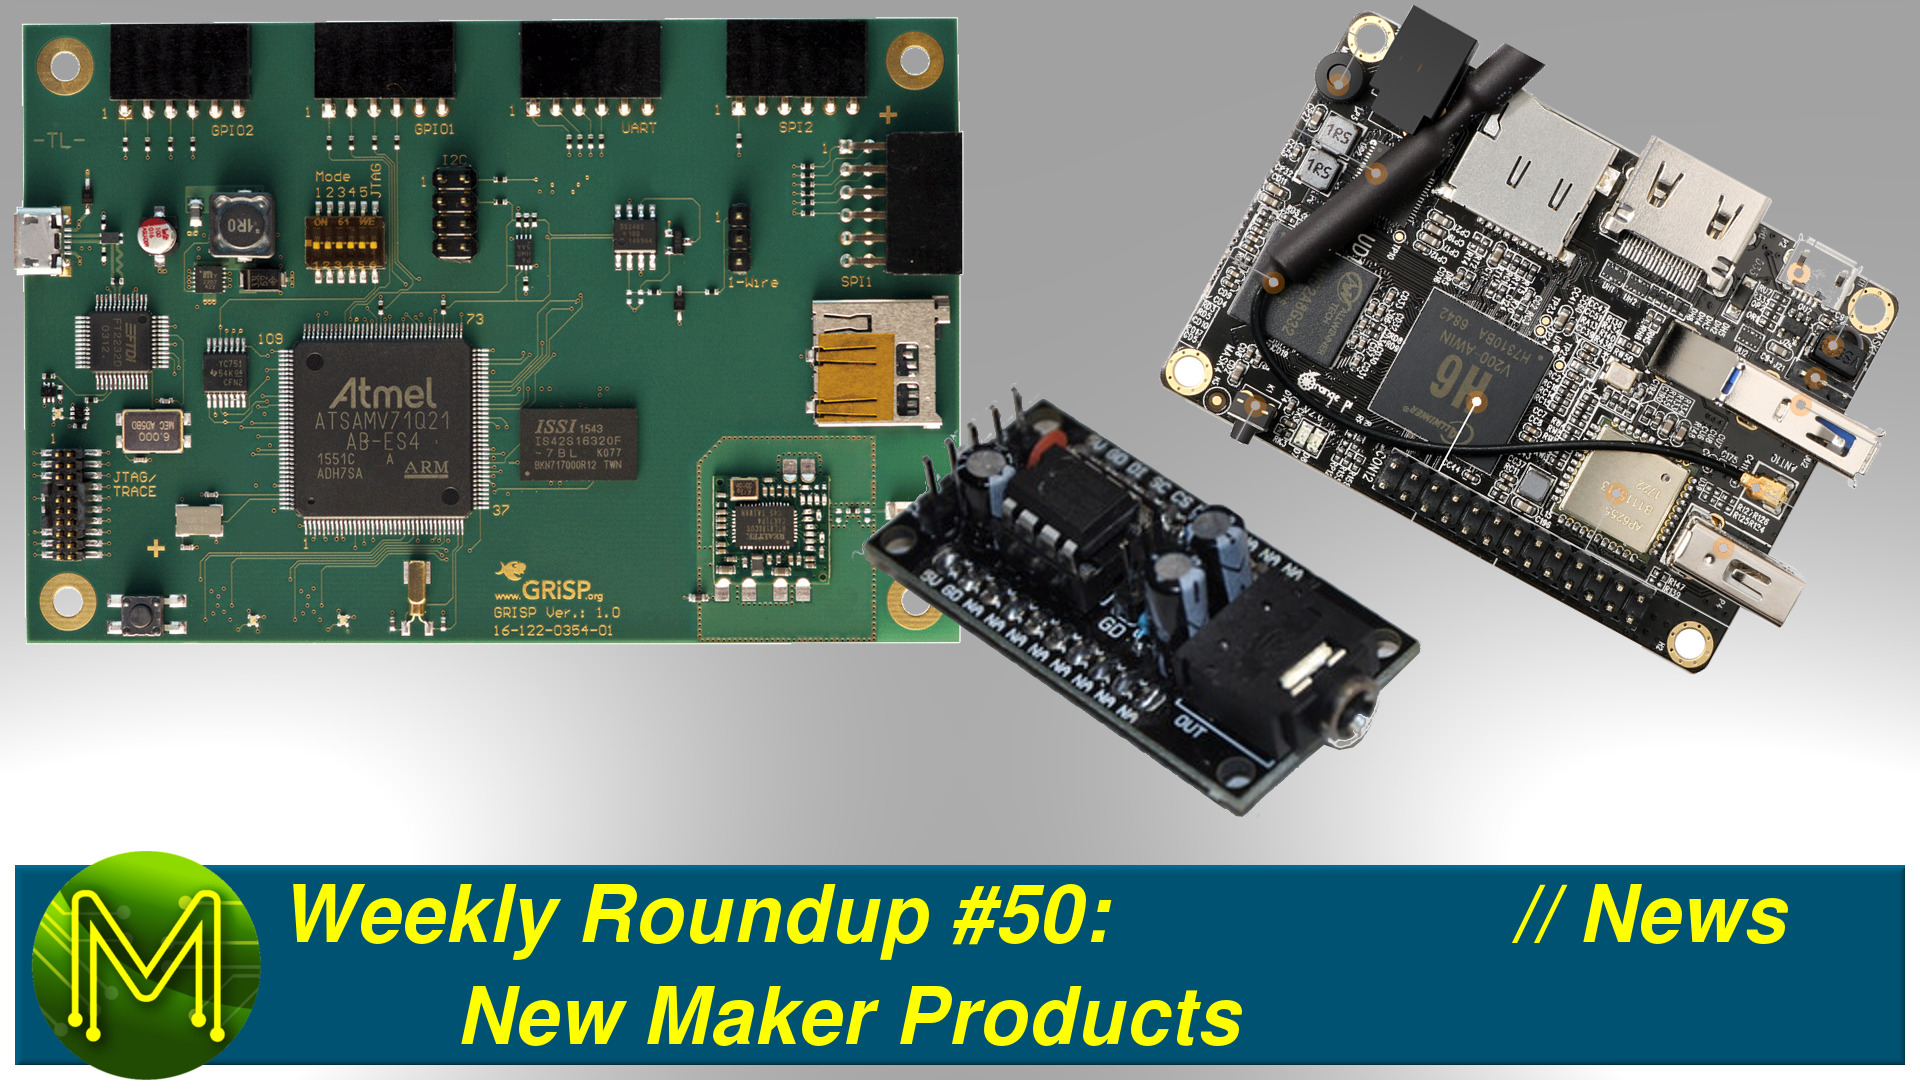 Weekly Roundup #50 - New Maker Products // News